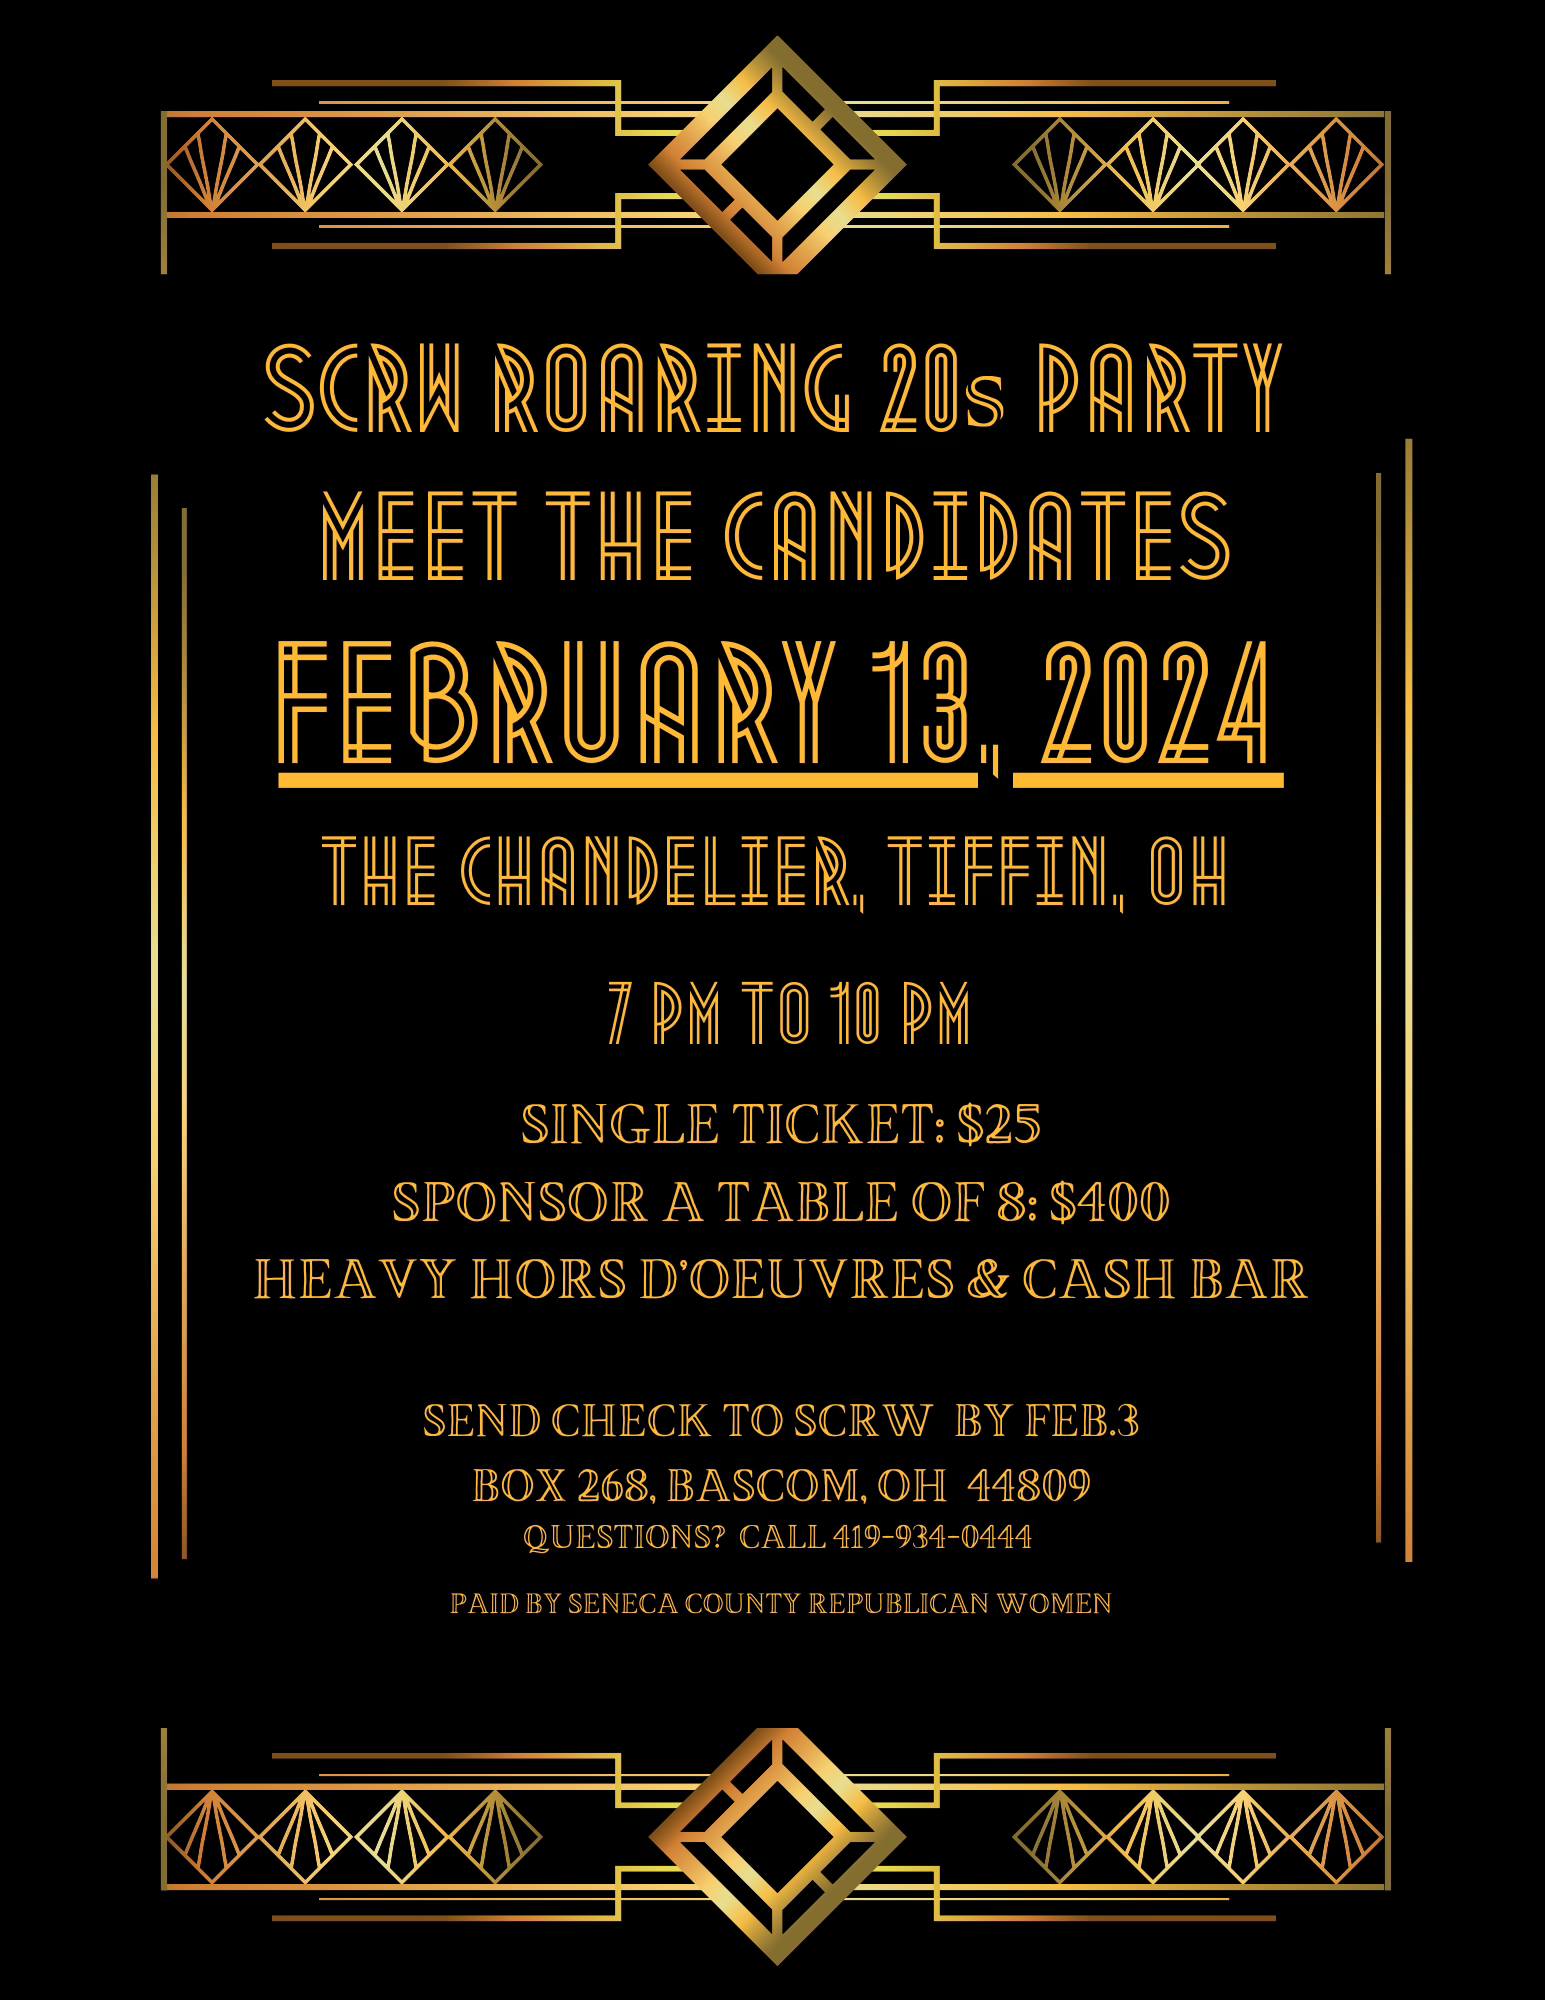 Roaring 20's Party/Meet the Candidates